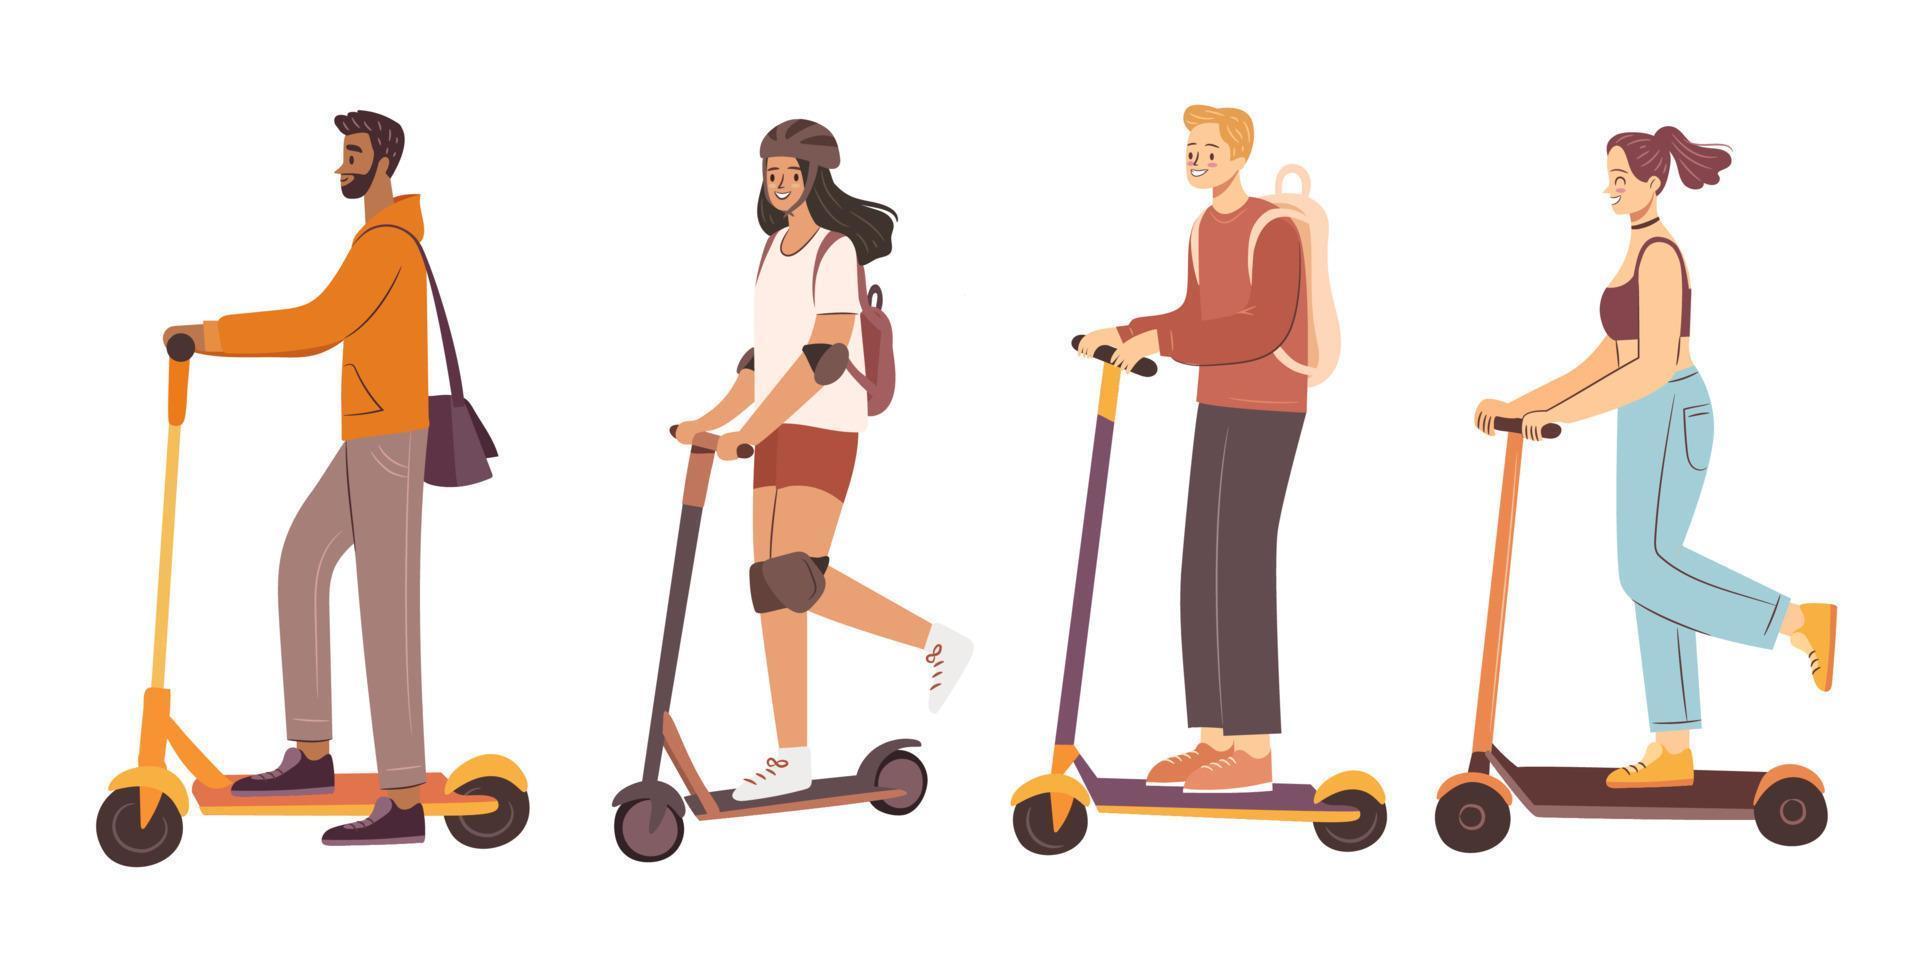 People on scooters. Man and woman riding electric scooter. E-scooter and kick-scooter for rent. Hand drawn flat vector illustration